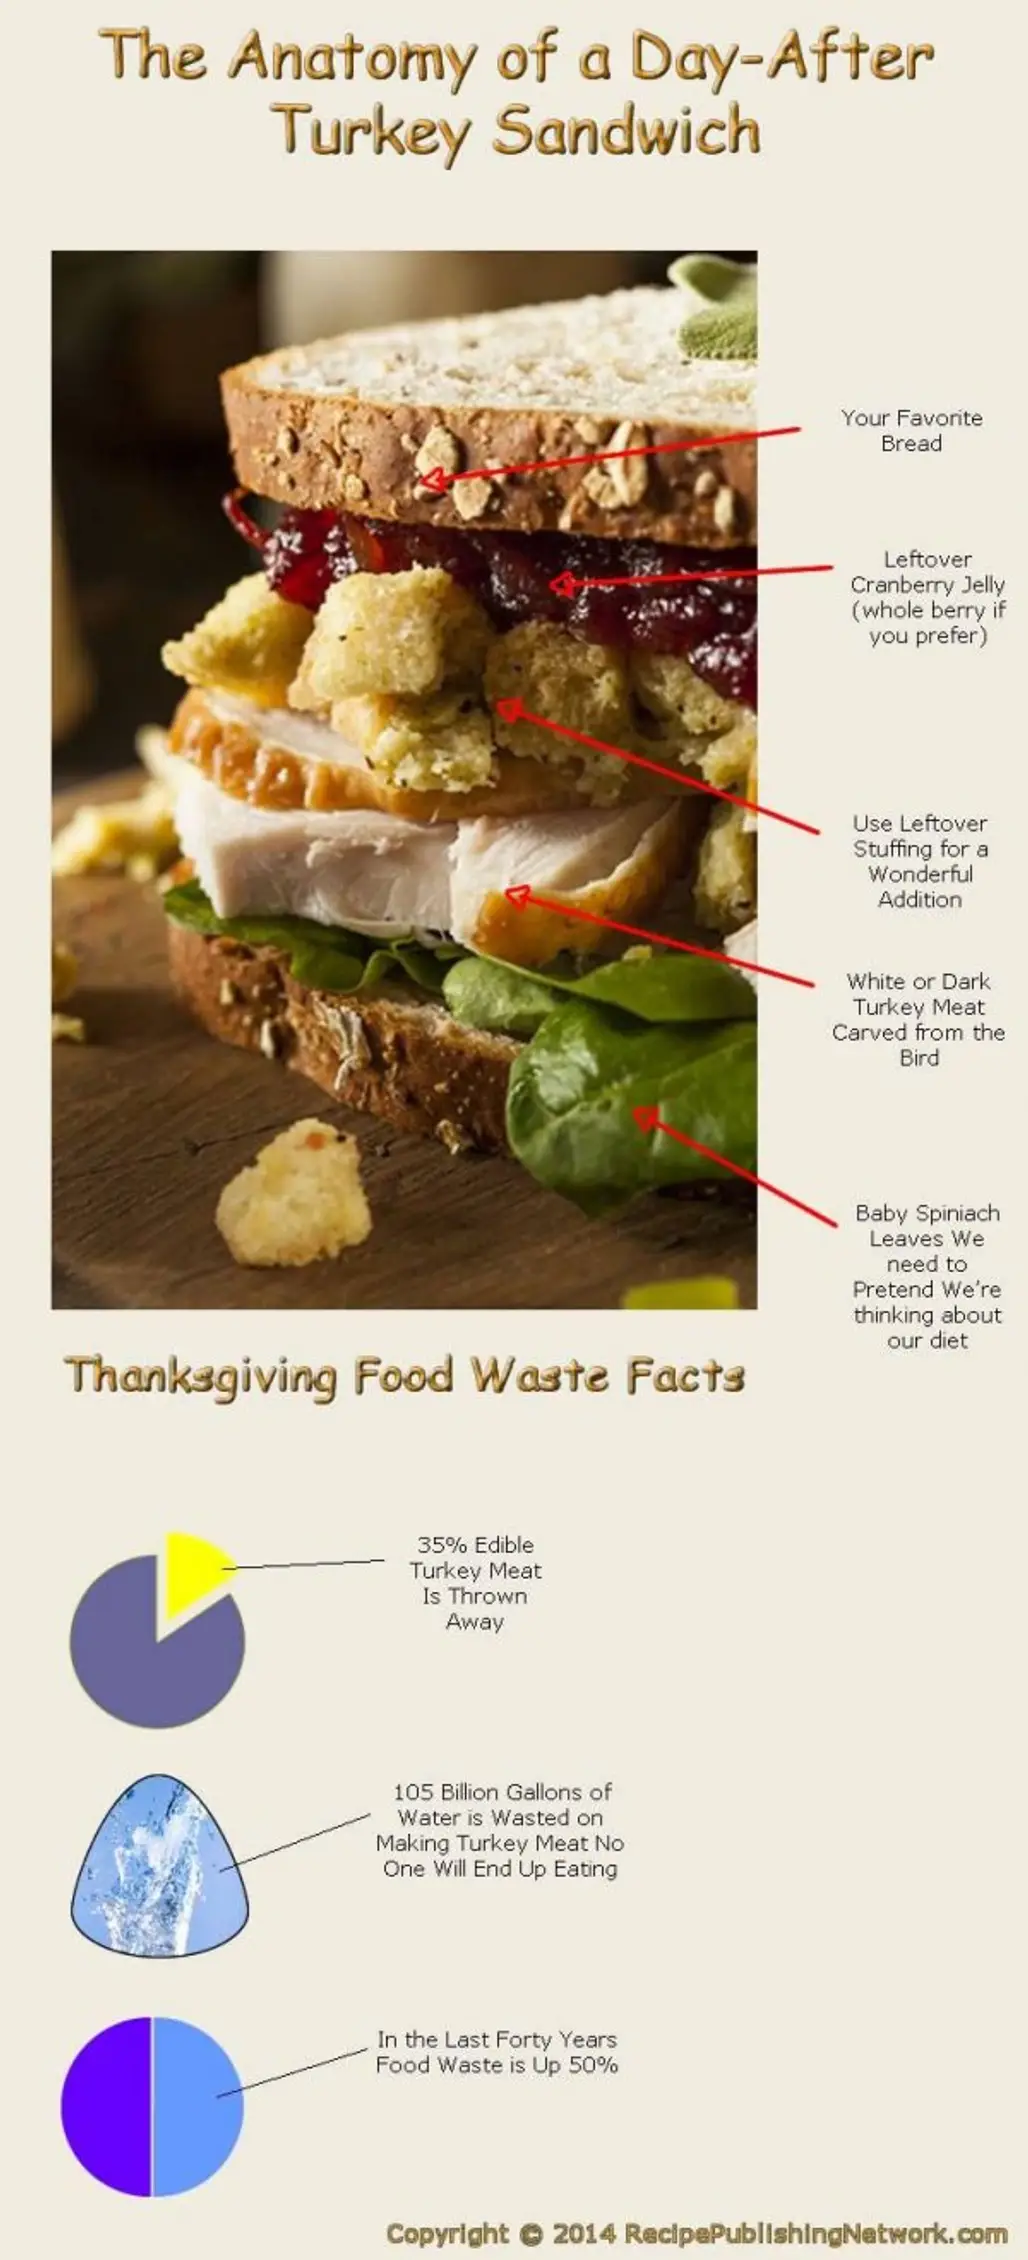 The Anatomy of a Day-after Turkey Sandwich